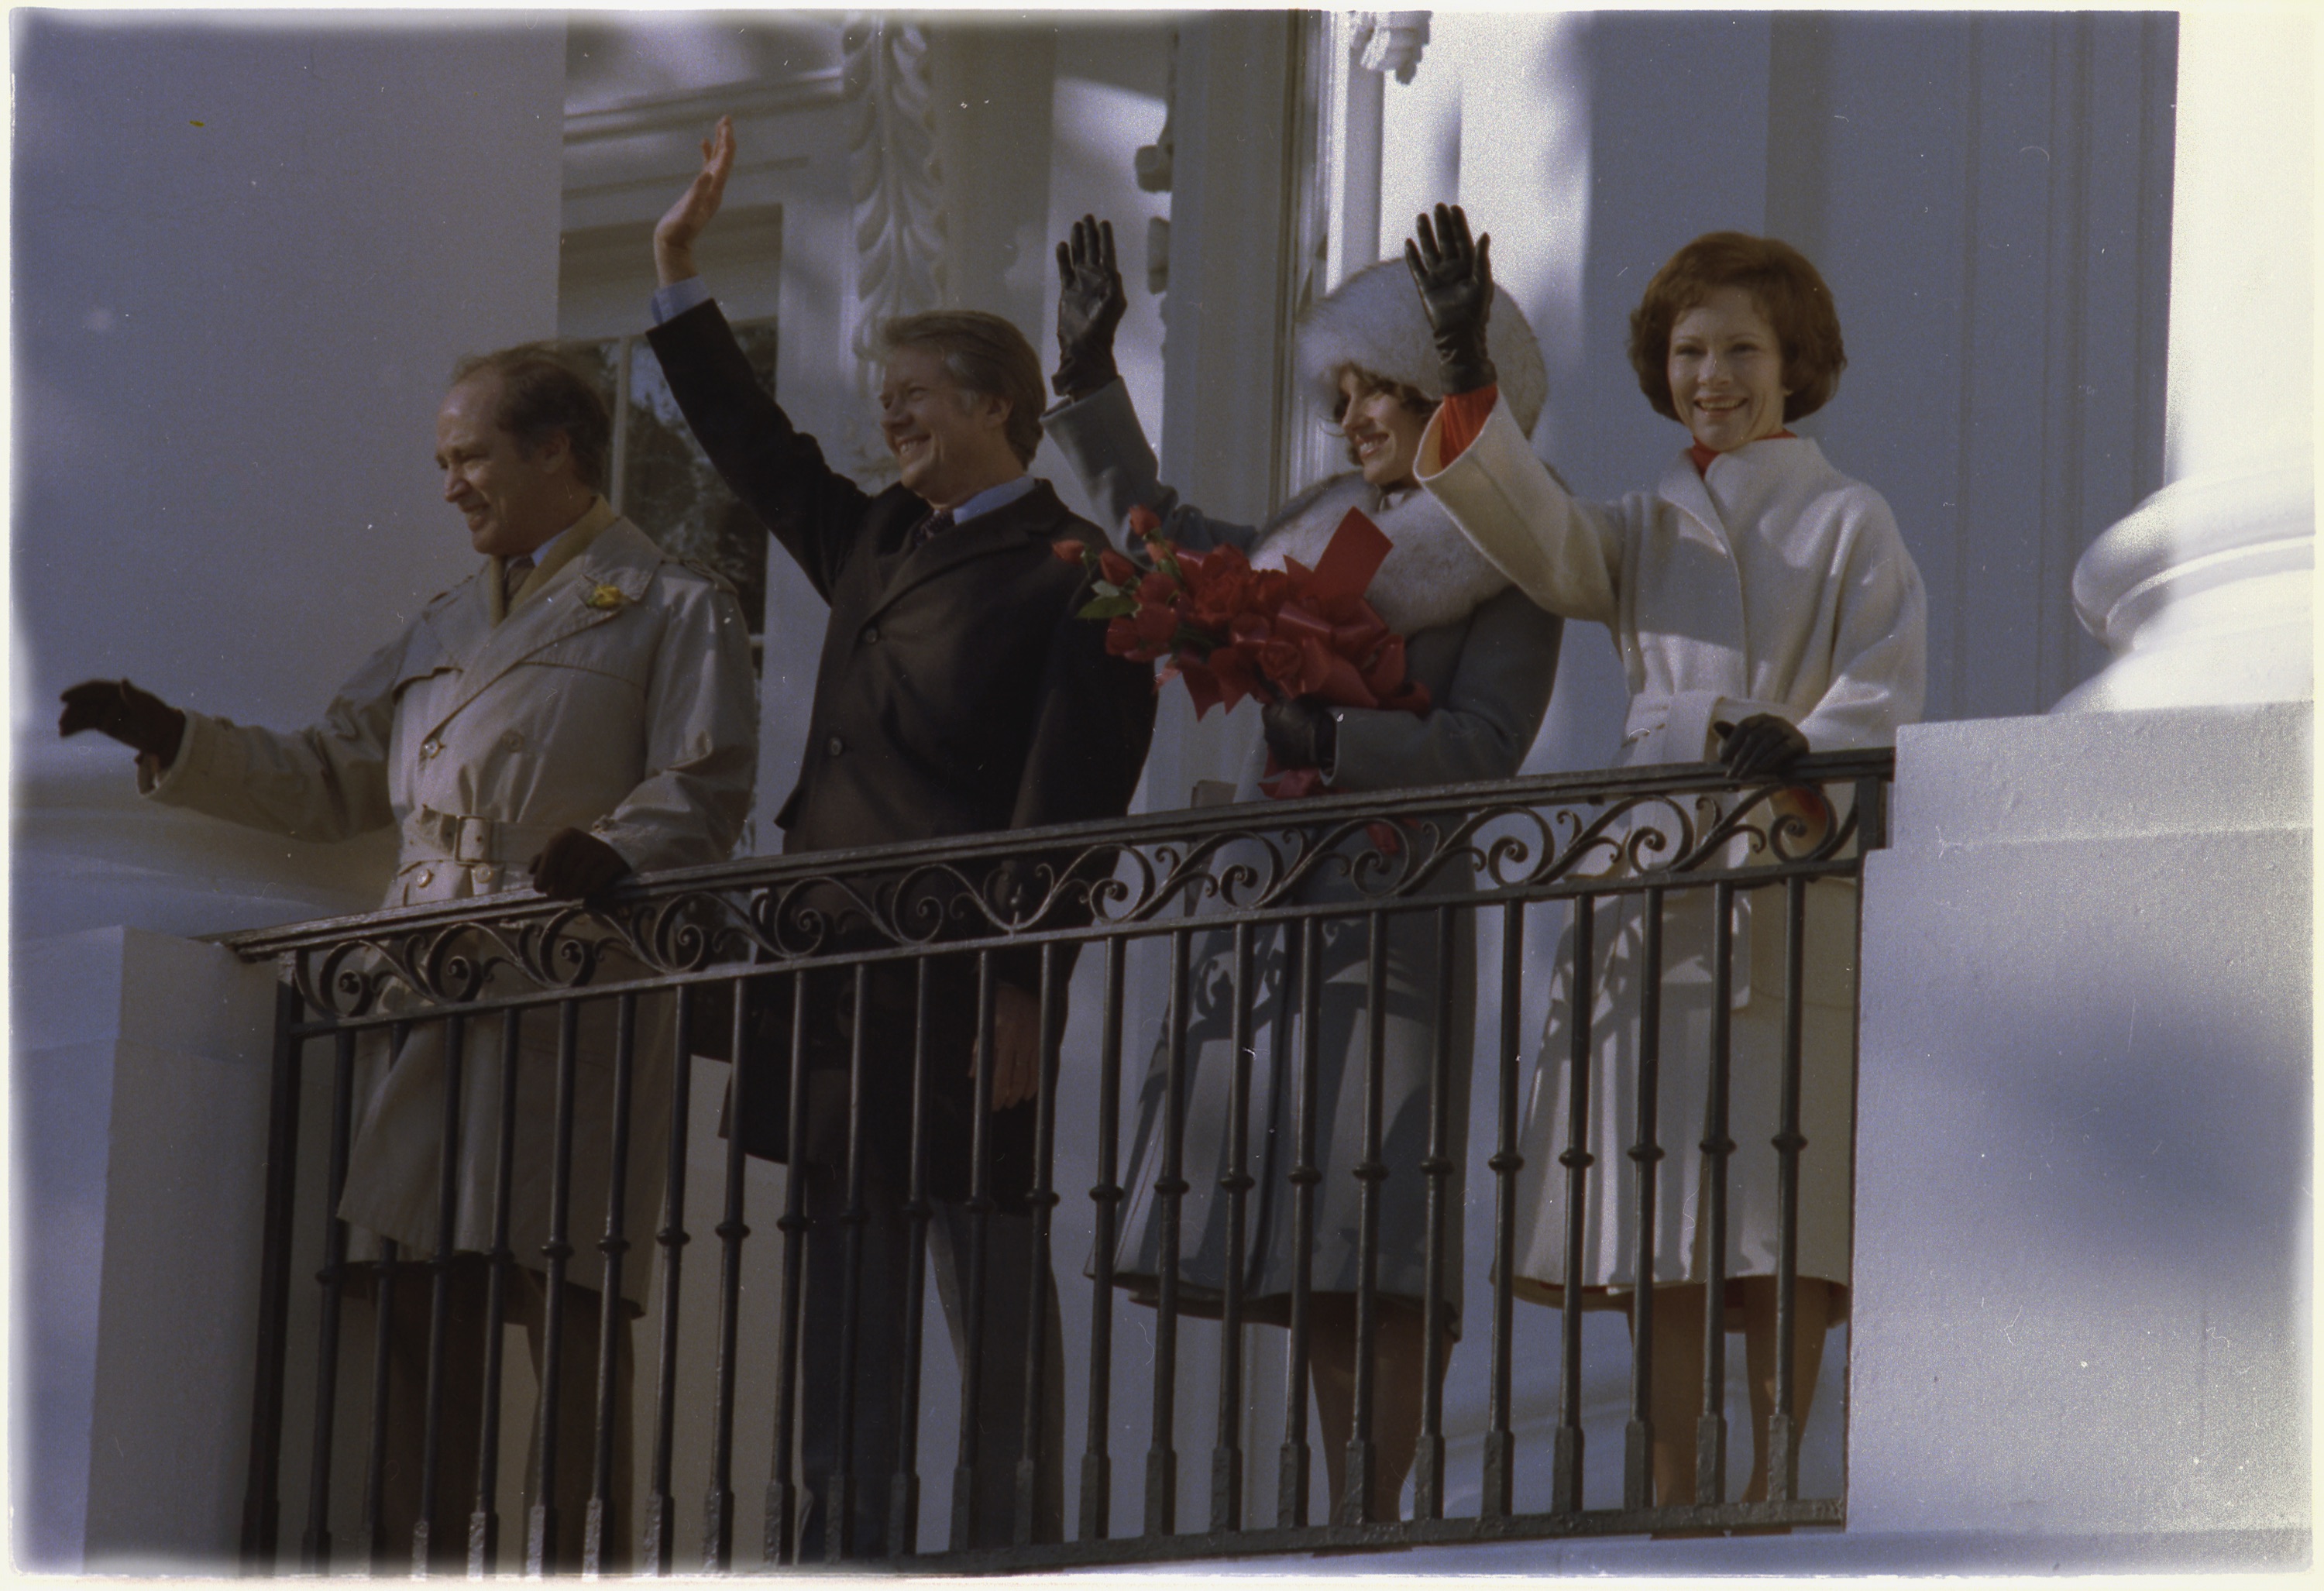 More details Prime Minister Pierre Trudeau of Canada, Jimmy Carter, Margaret Trudeau and Rosalynn Carter at State Visit arrival. Photo: U.S. National Archives and Records Administration